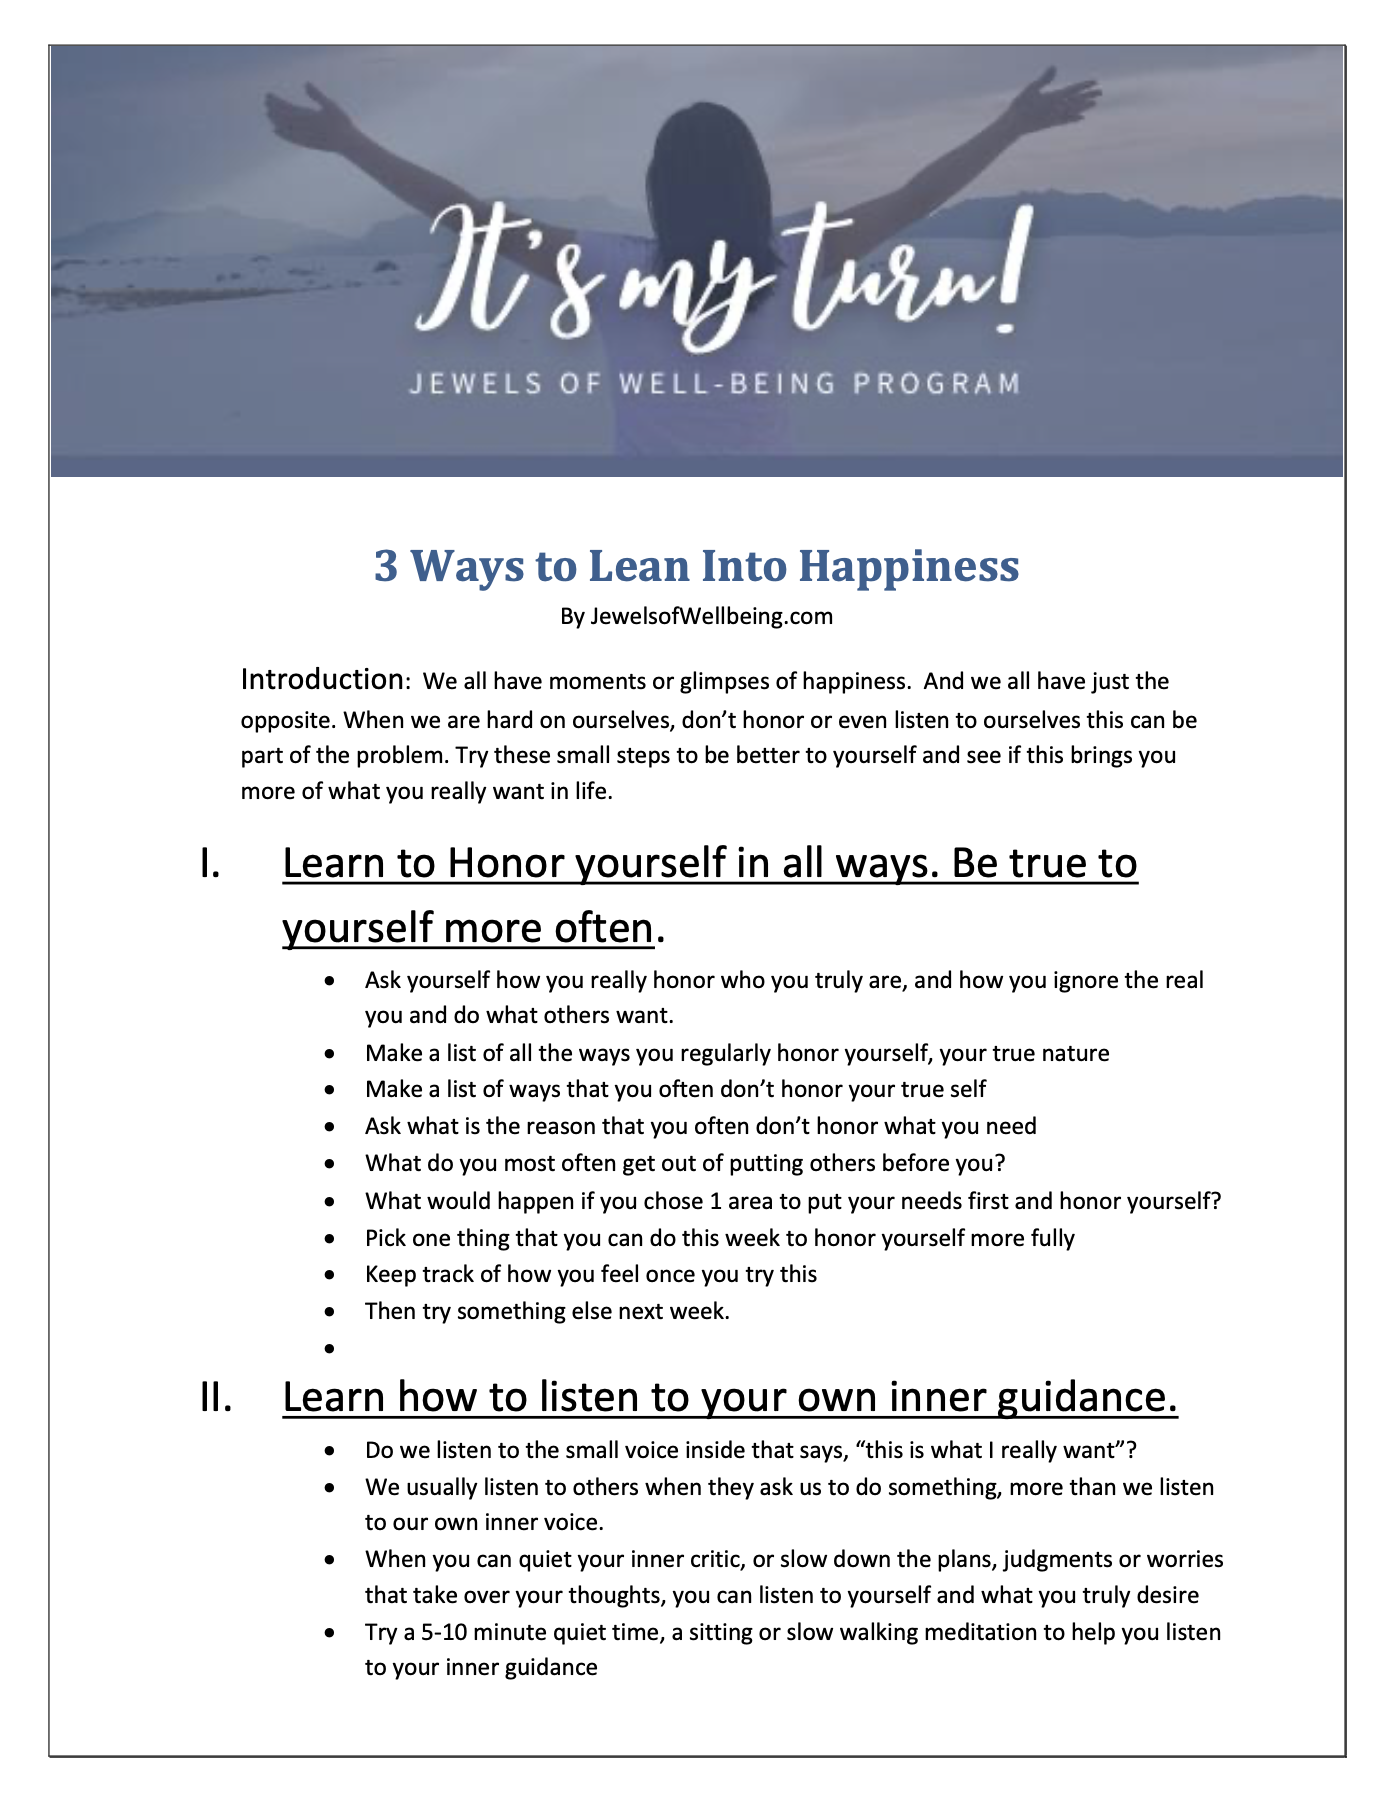 3 Ways to Lean Into Happiness